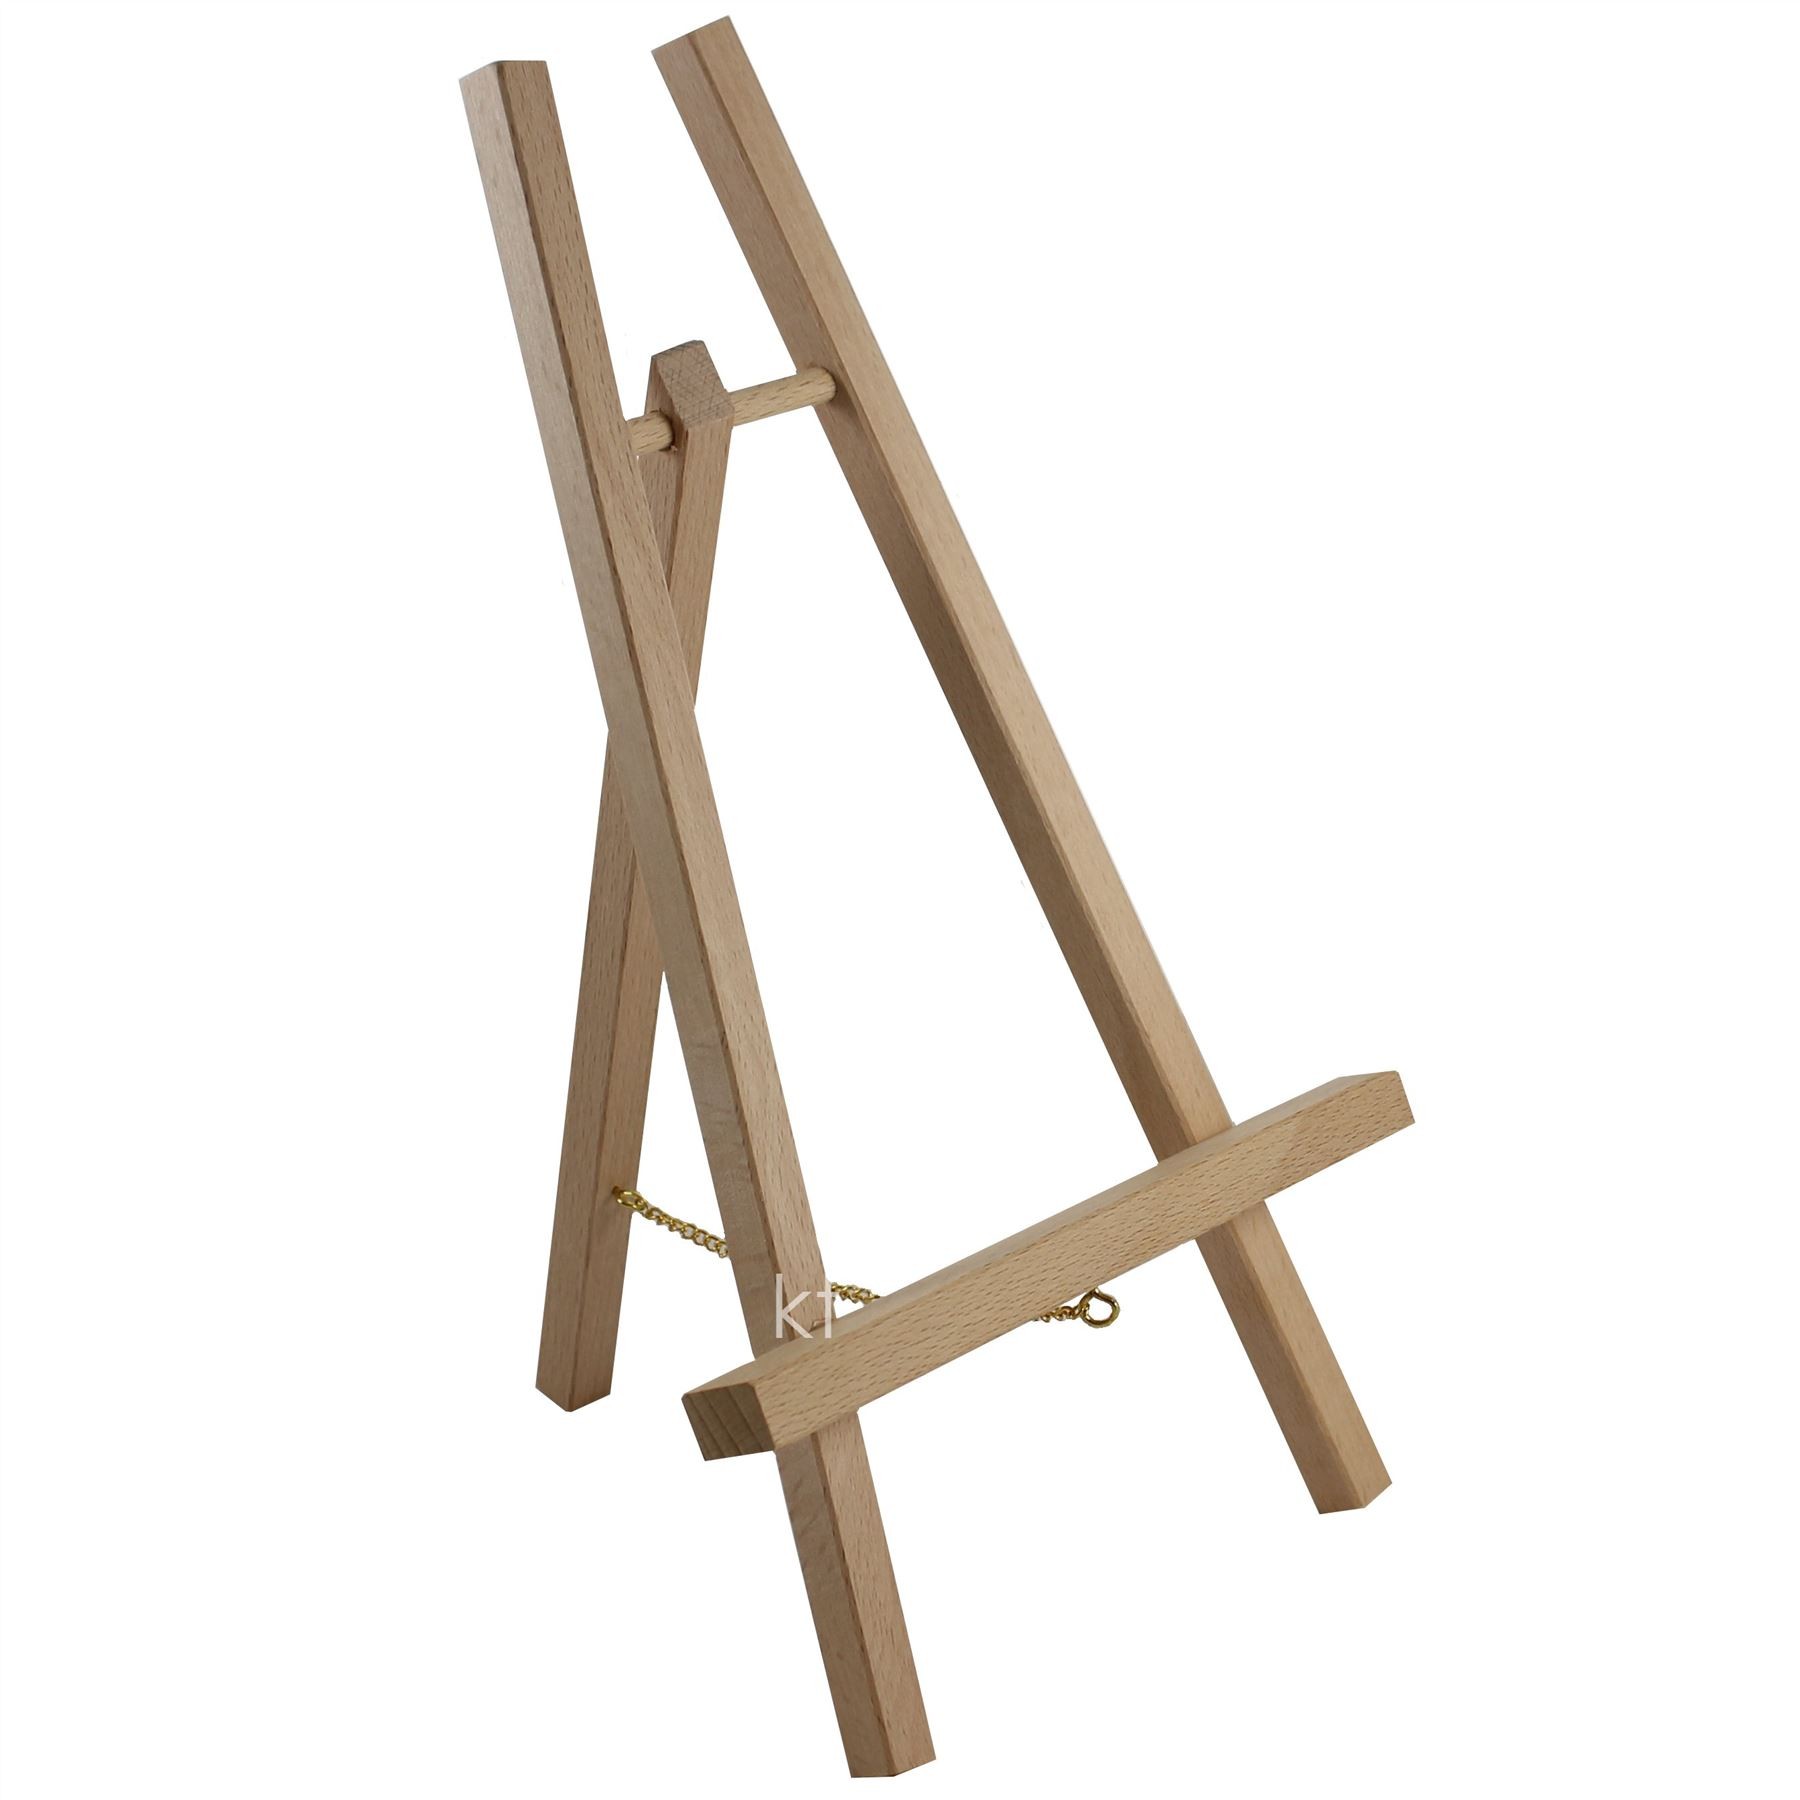 Loxley Small Wooden Cheshire Display Easel Lightweight